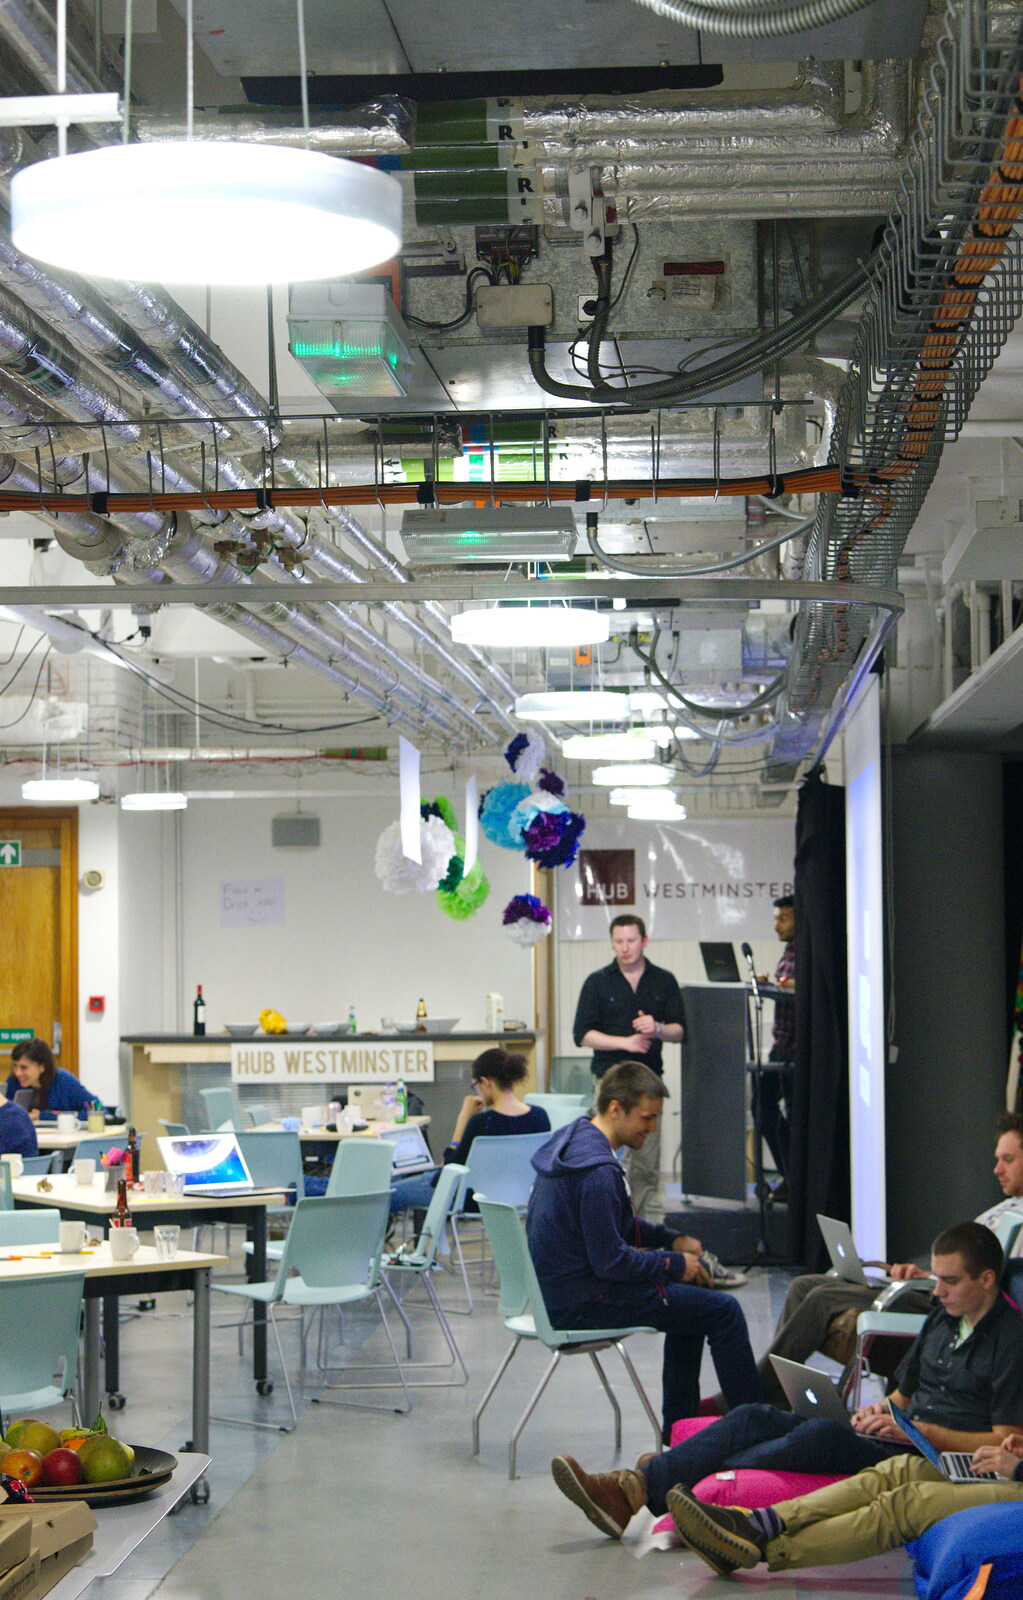 The Hub's functional ceiling from SwiftKey Innovation, The Hub, Westminster, London - 21st February 2014